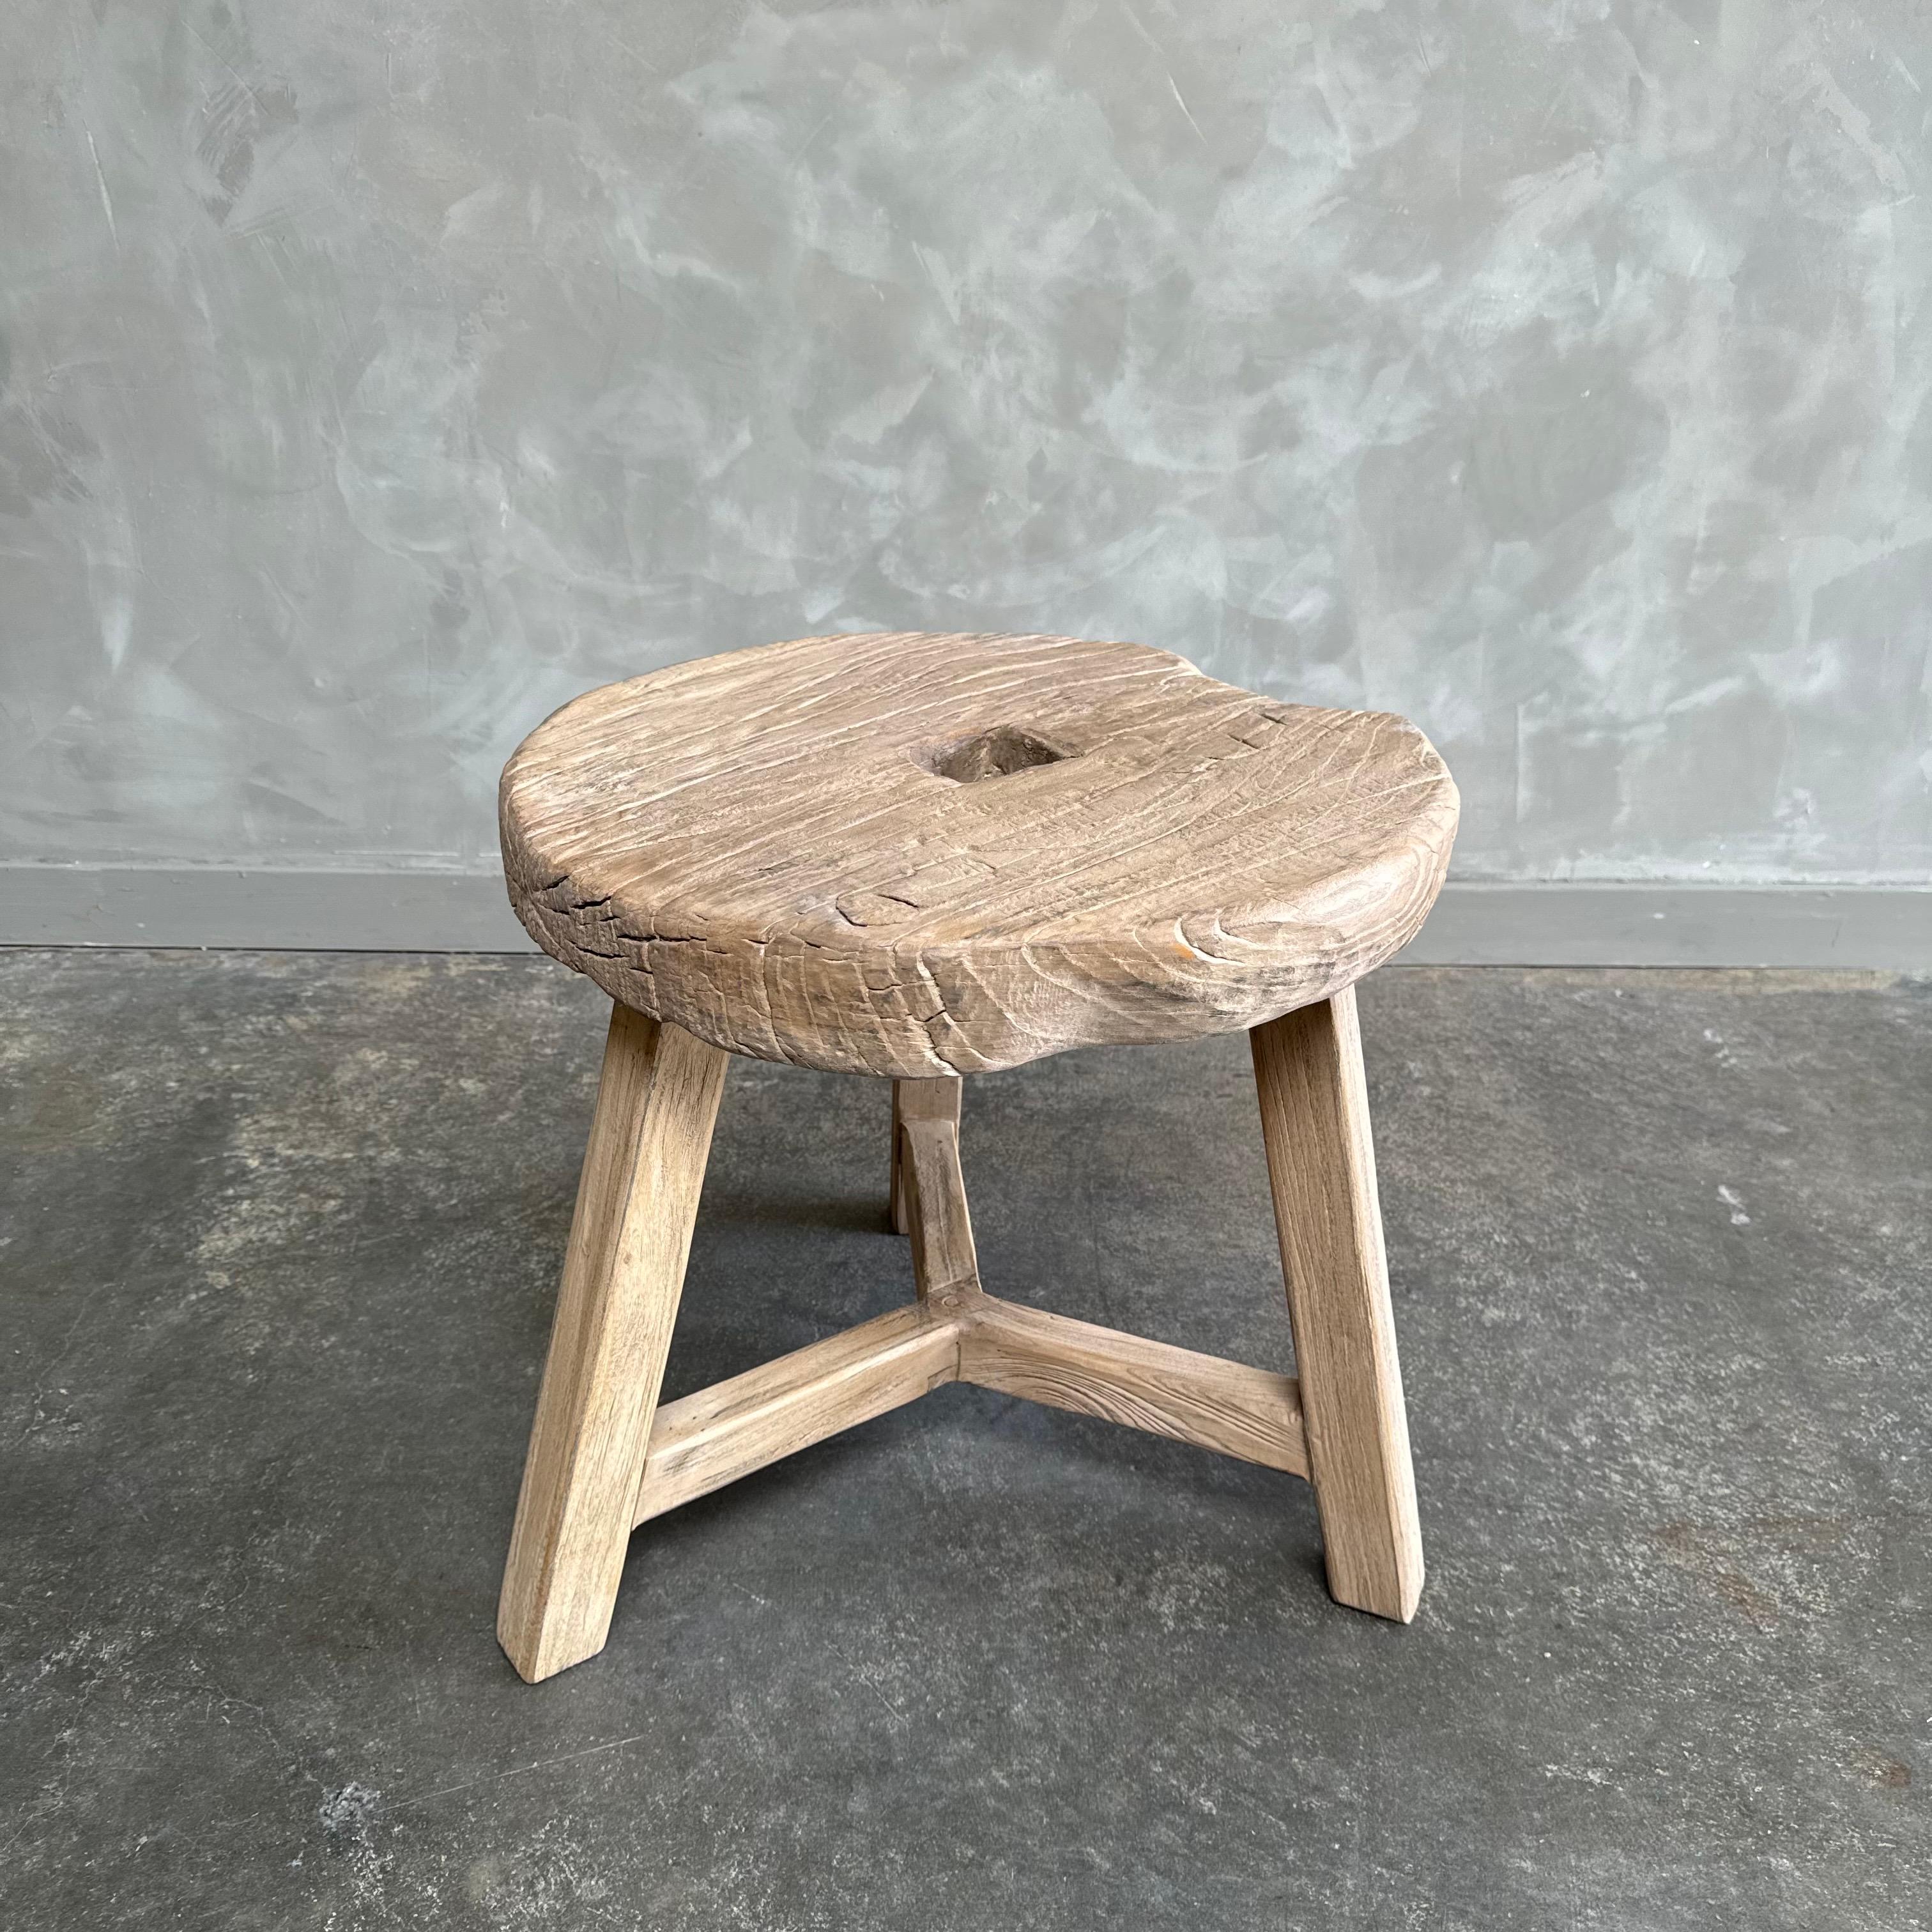 Antique wheel side table. This vintage elm wood wheel table is finished with medium to dark stain. The table is solid and sturdy ready for everyday use. Use as a side table, stool, powder room to add vintage style to your home. One of a kind